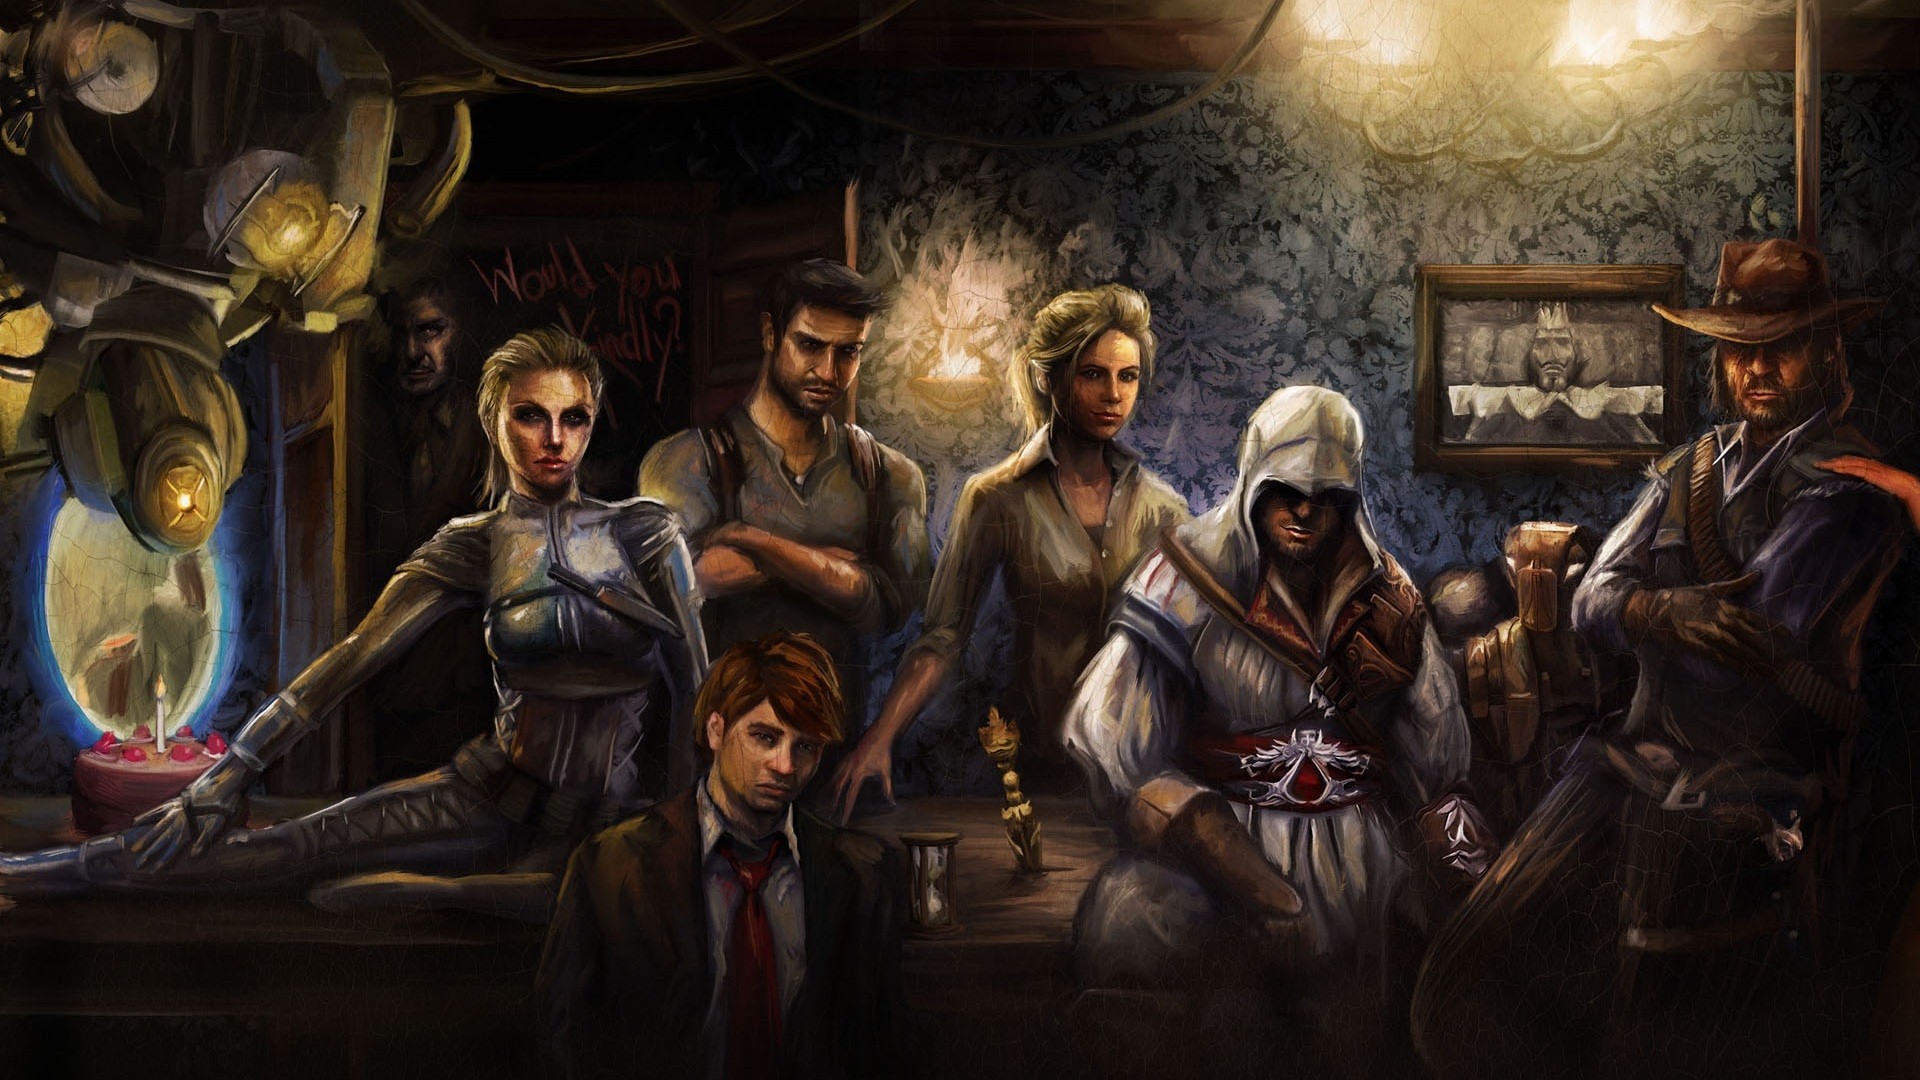 Portal Game BioShock Assassins Creed Red Dead Redemption Metal Gear Solid 3 Snake Eater Ezio Auditor 1920x1080